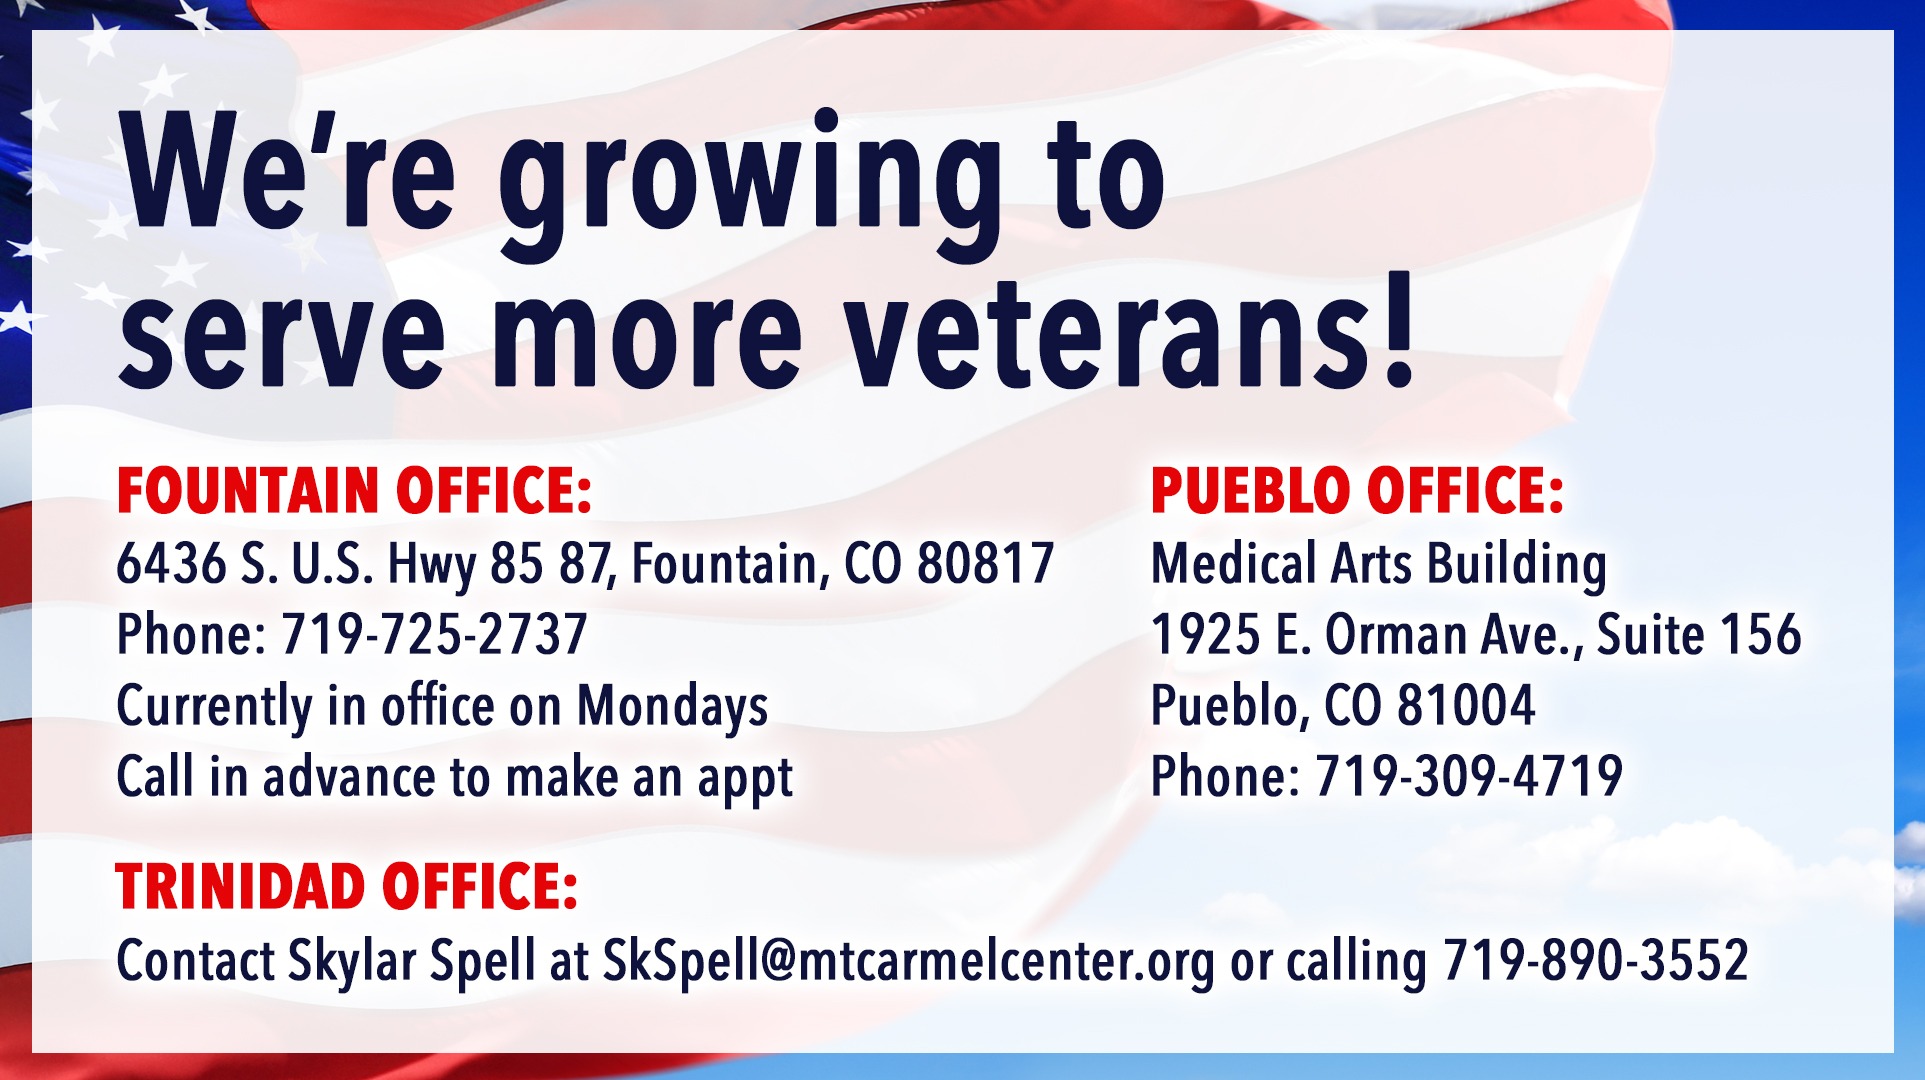 We're growing to serve more veterans!